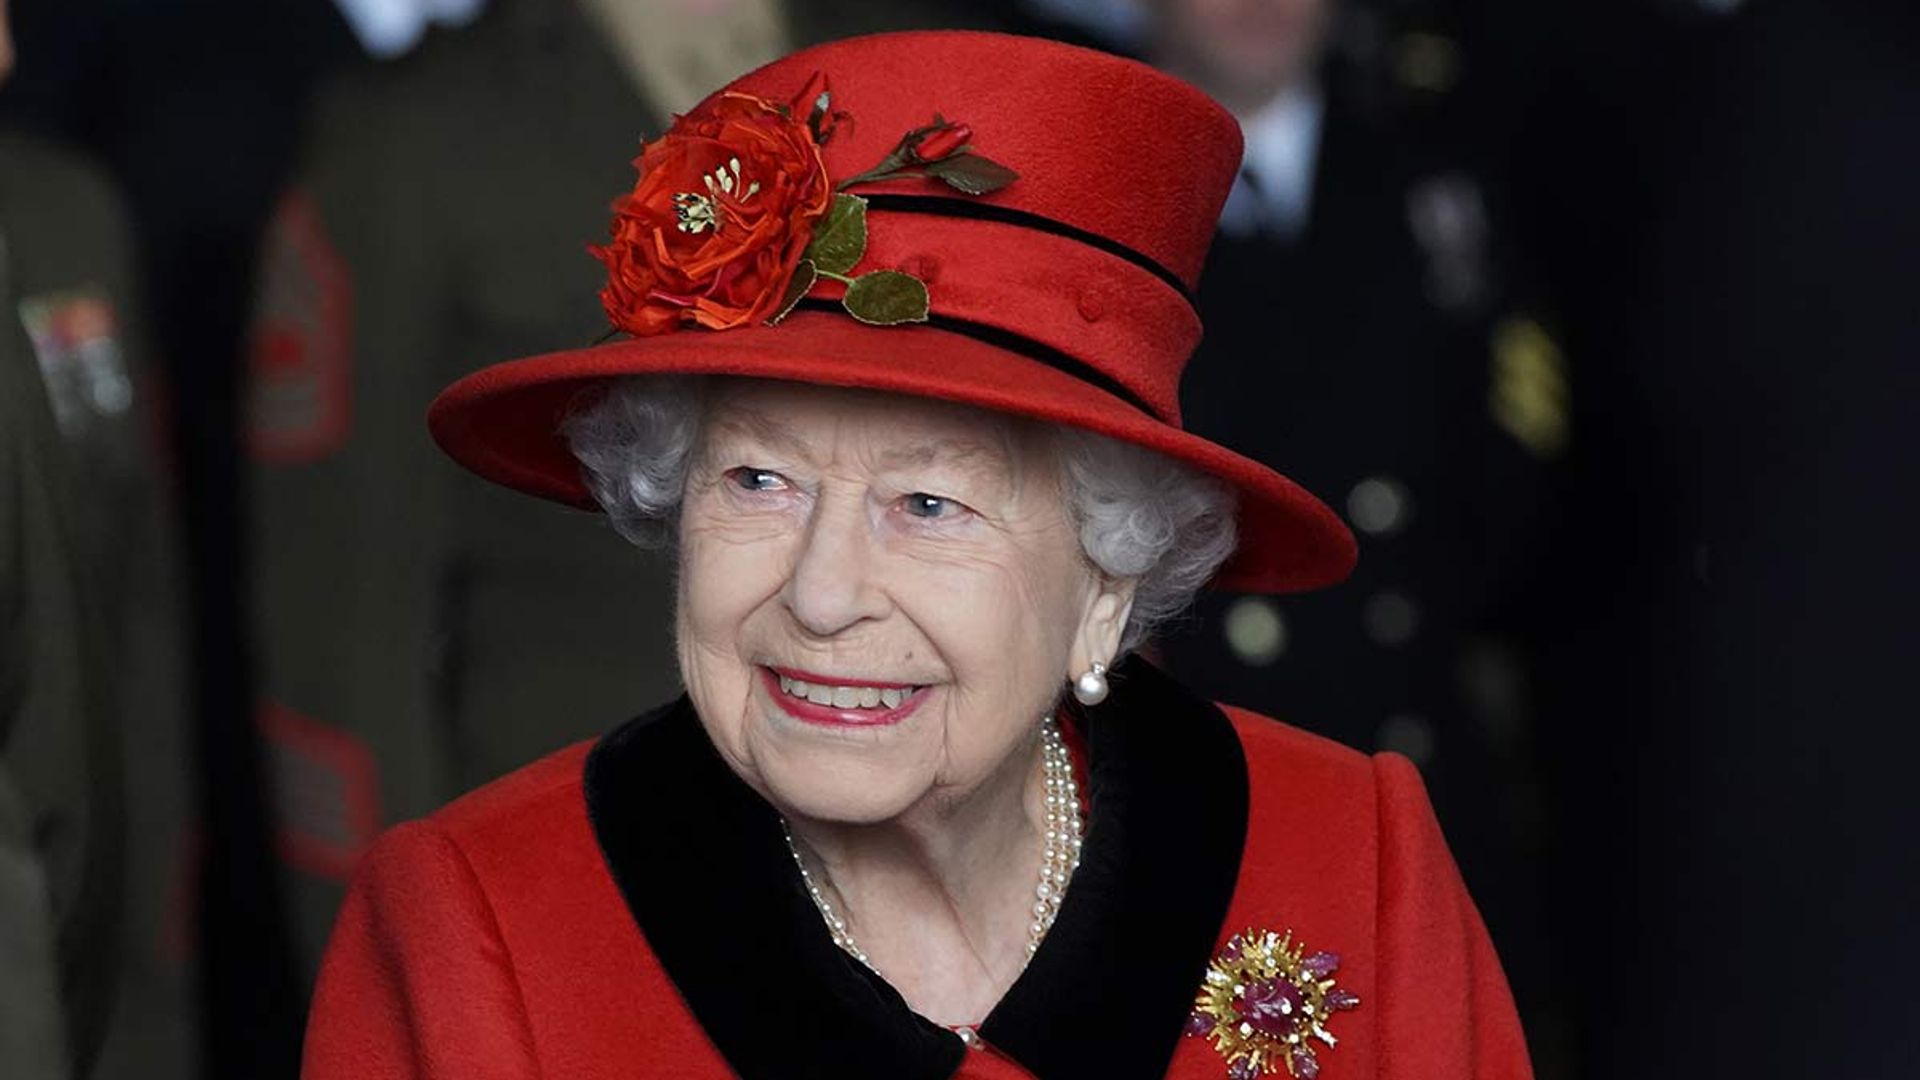 The Queen's touching tribute to Prince Philip in latest outfit revealed